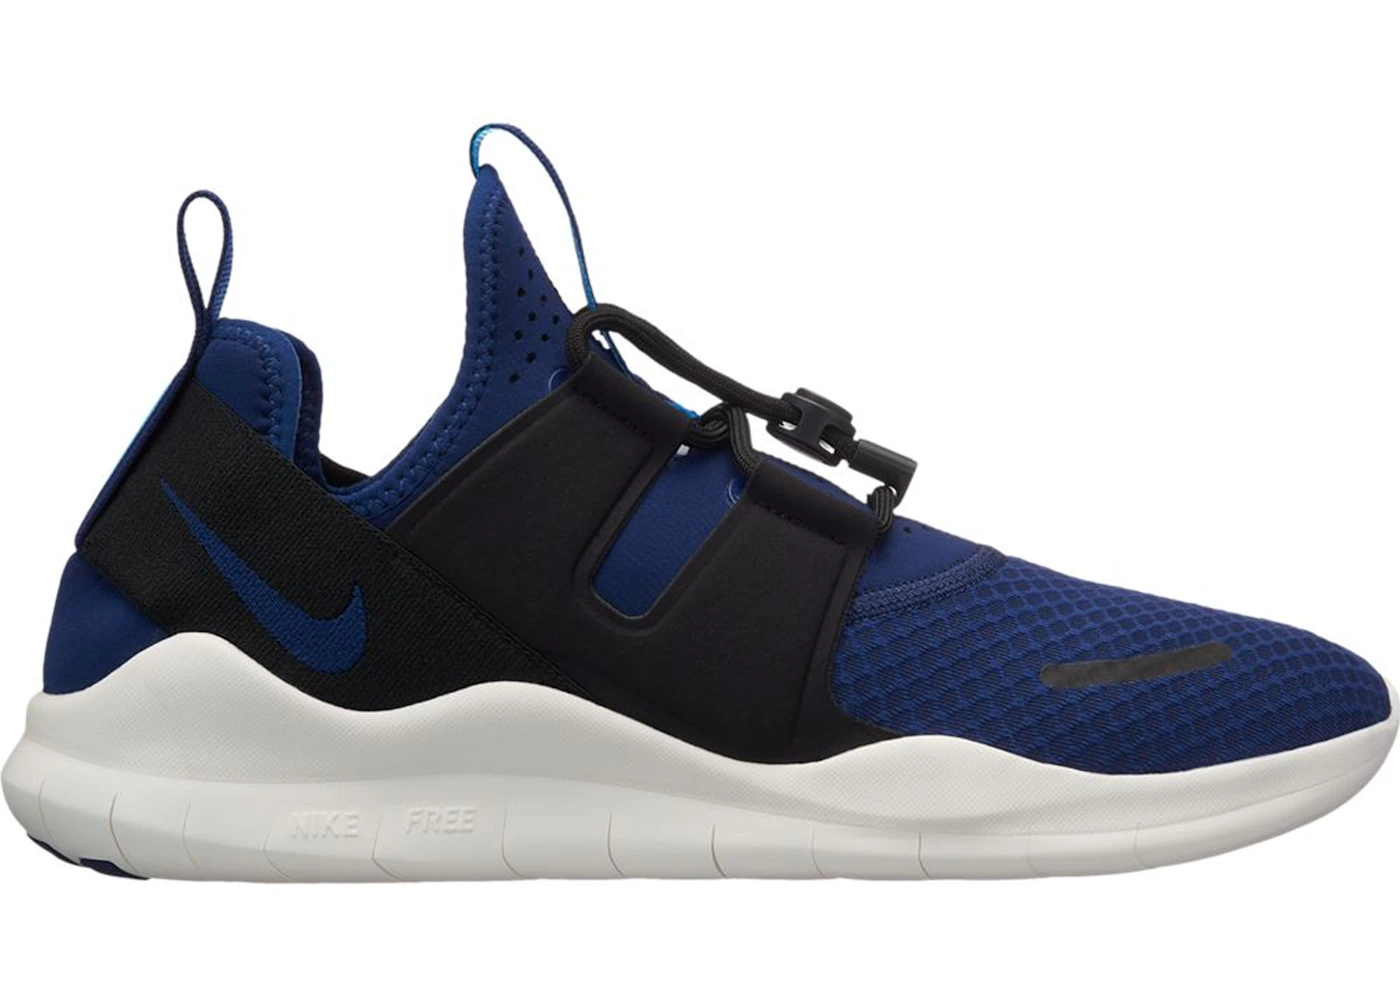 Tectonic Dissipation Absolute Nike Free RN CMTR 2018 Blue Void Black - AA1620-400 - US